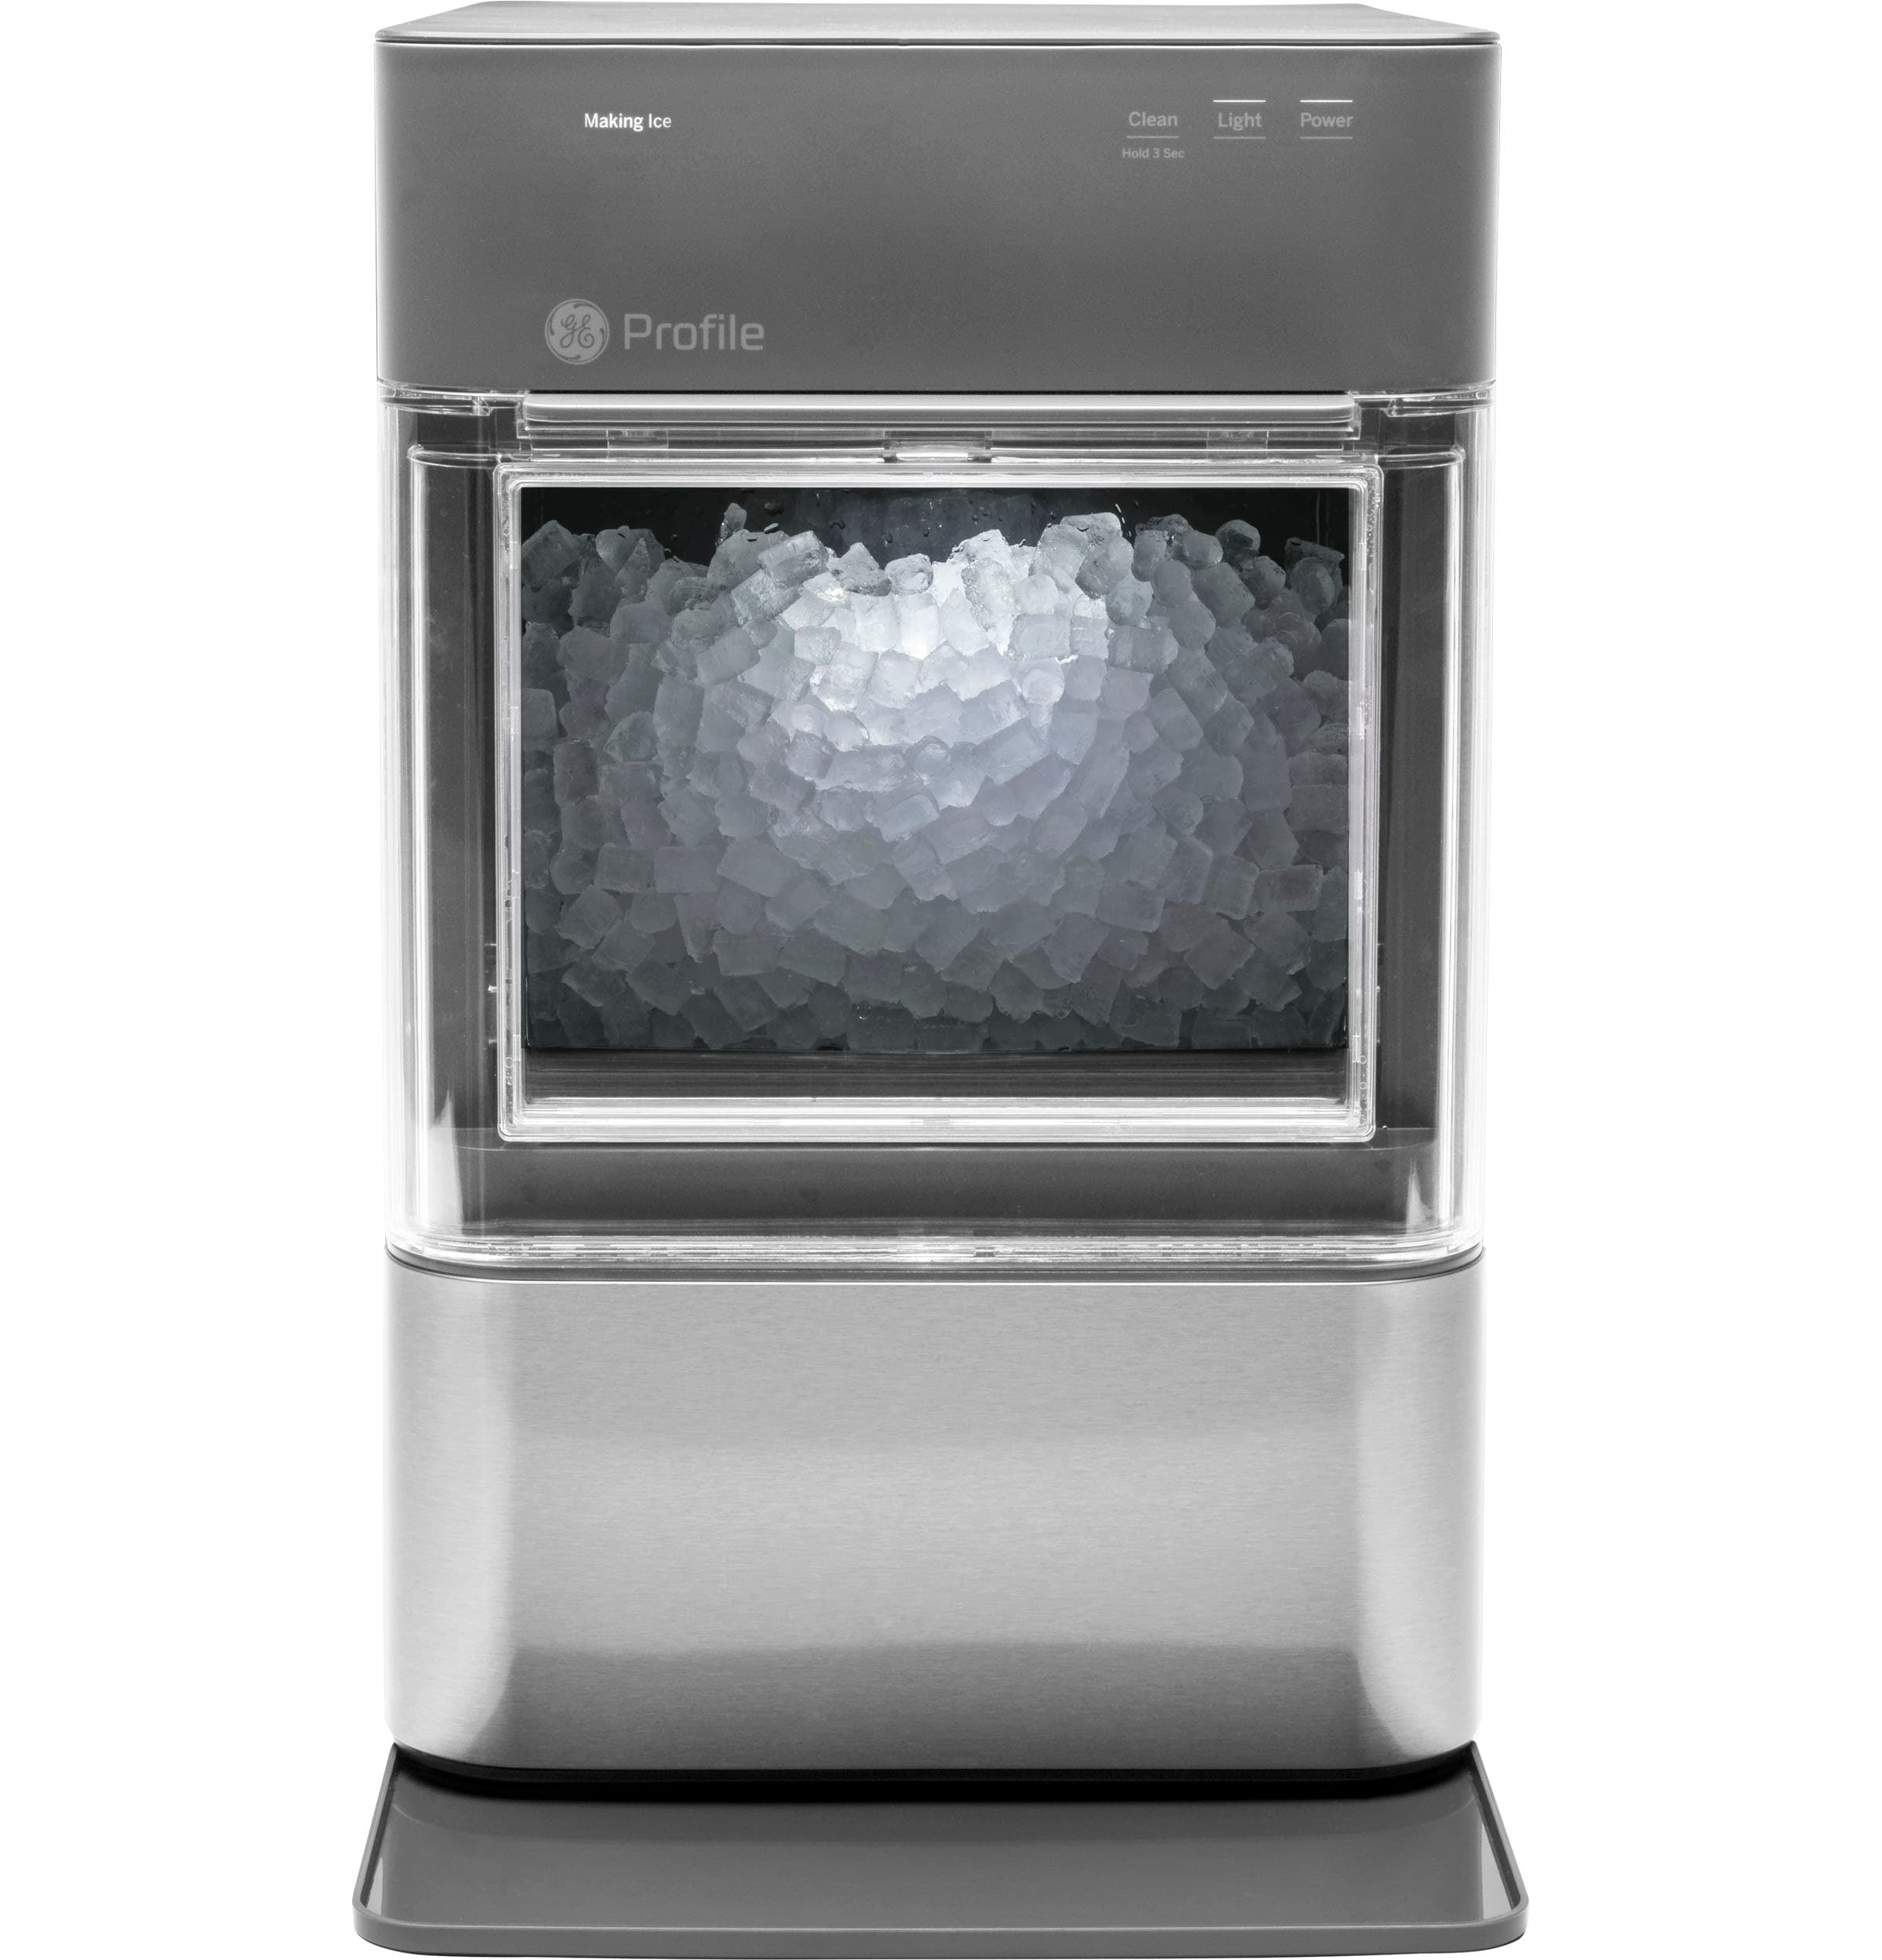 Frigidaire 44-lb Drop-down Door Countertop or Portable Nugget Ice Maker  (Stainless Steel) in the Ice Makers department at